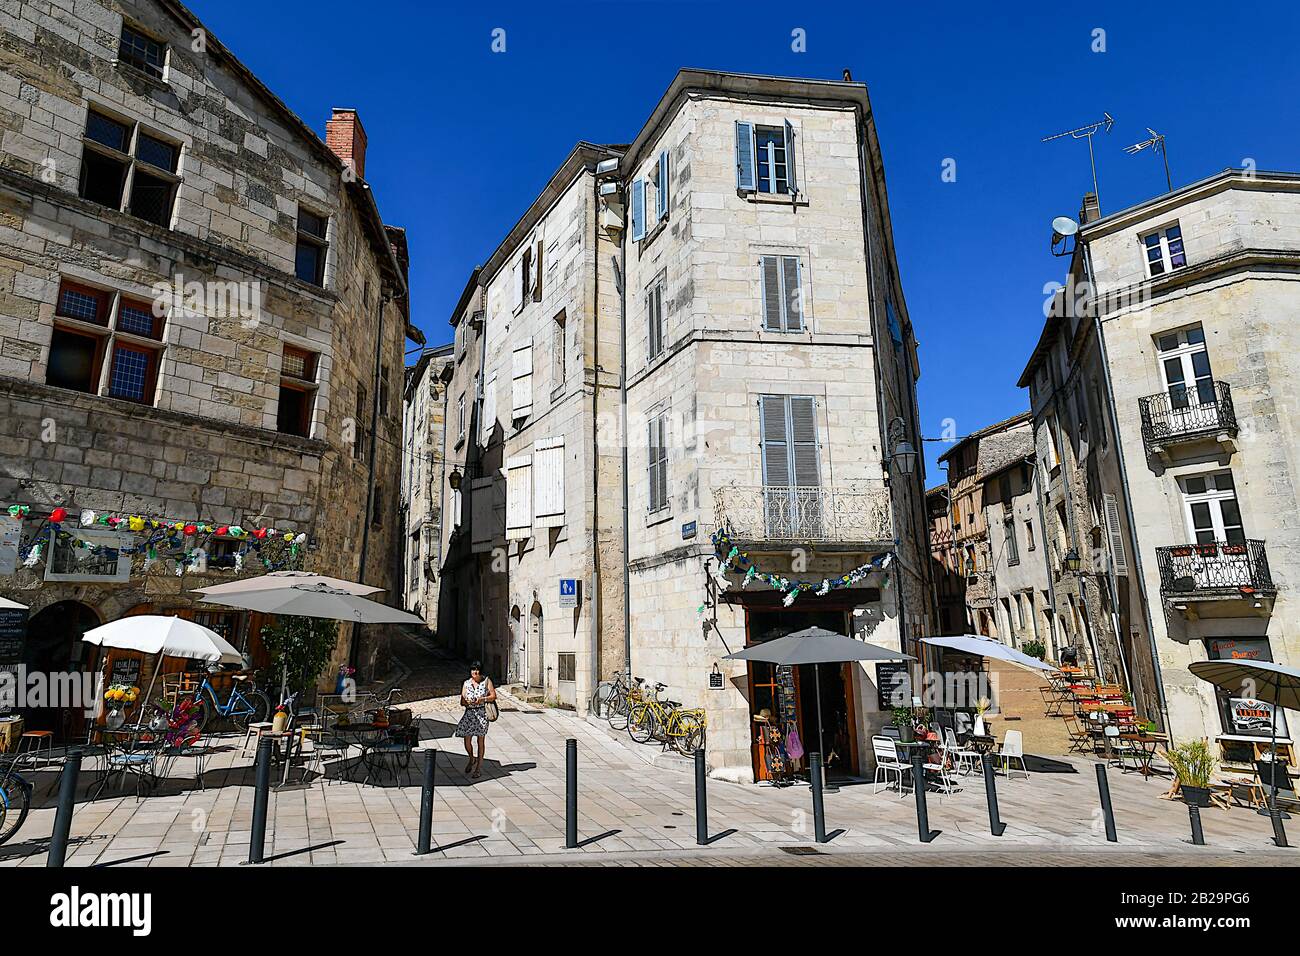 Street with townhouses, Preigueux, Nouvelle-Aquitaine, France Stock Photo